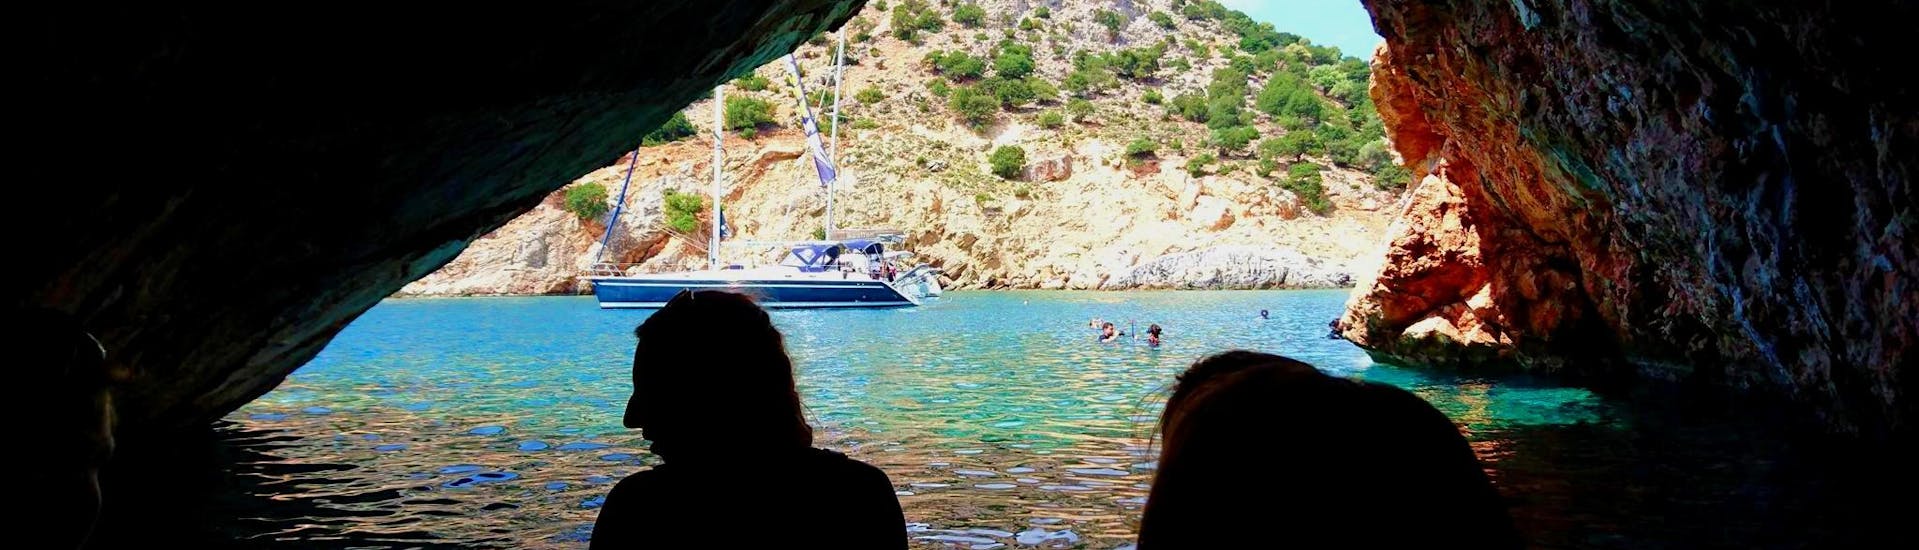 On Naxos Catamaran's Private Sailing Cruise to Rina Cave and Koufonissi, the participants are exploring the cave from the inside.